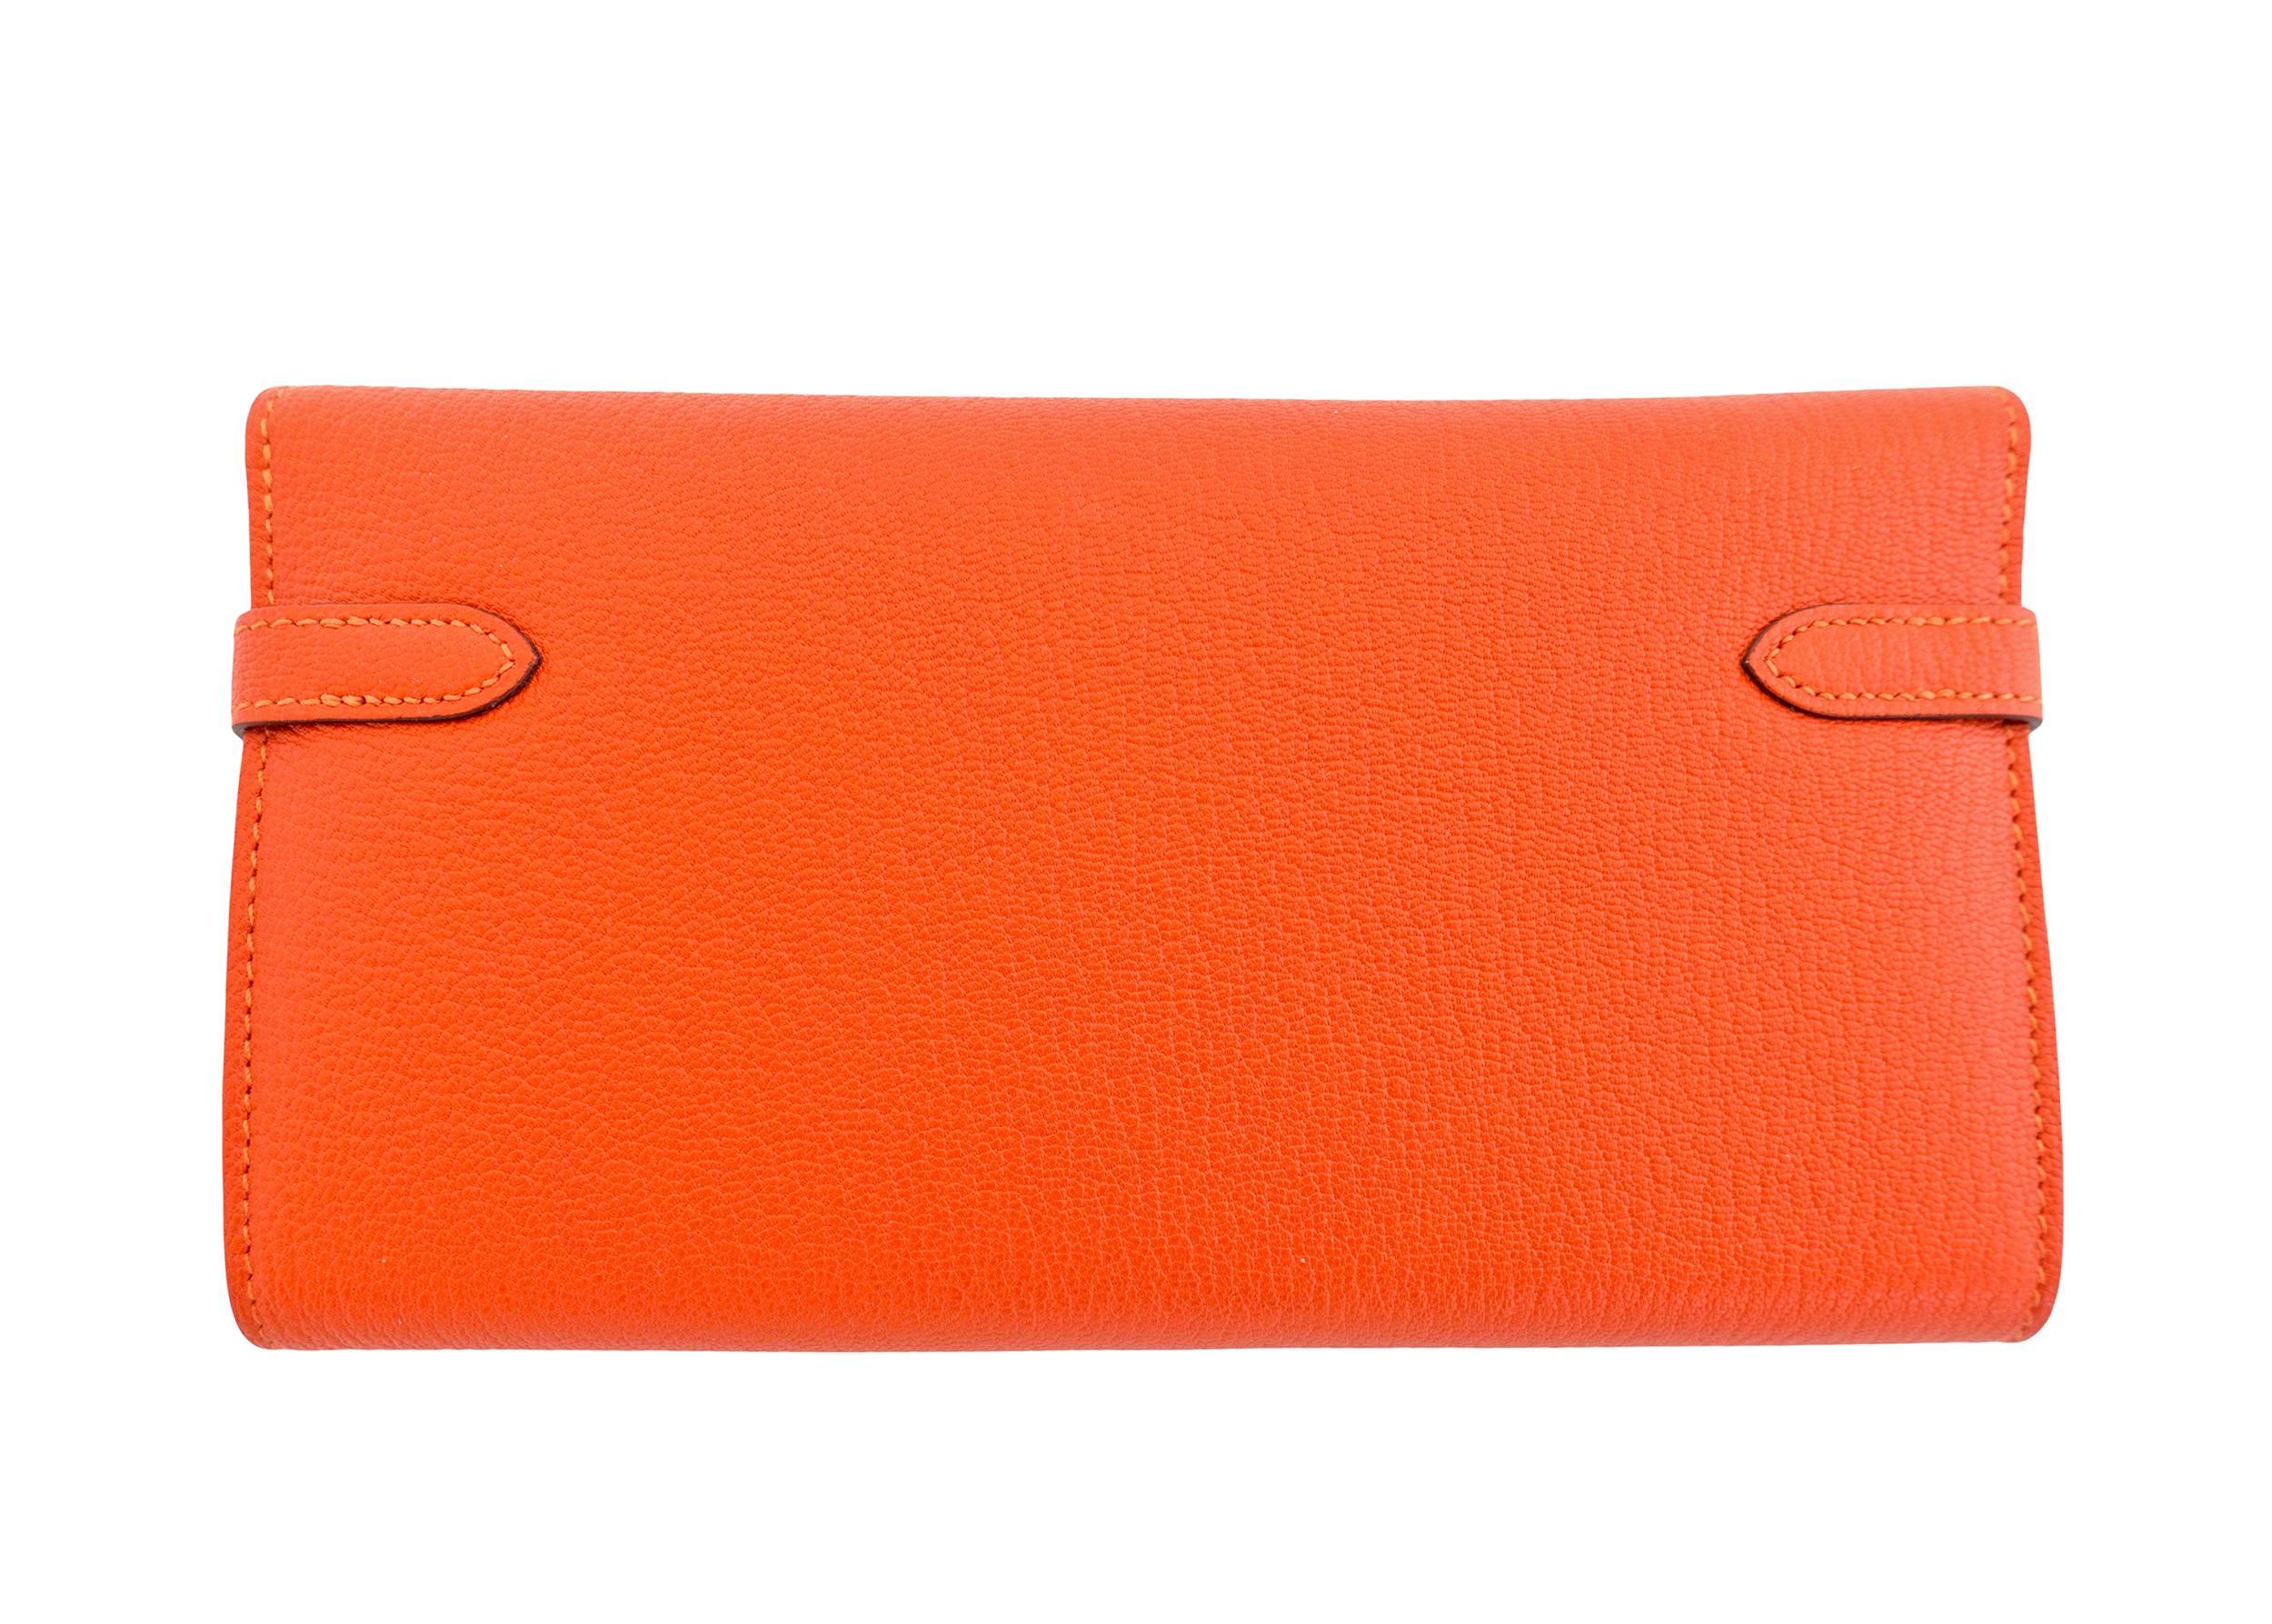 Hermes Feu Orange Kelly Wallet Chevre Palladium PHW Iconic
Store fresh. Pristine Condition.  
Perfect gift! Coming full set with Hermes box and ribbon.  
Feu Orange is a gorgeous orange.
So luxurious in Chevre skin with a slight sheen.
A